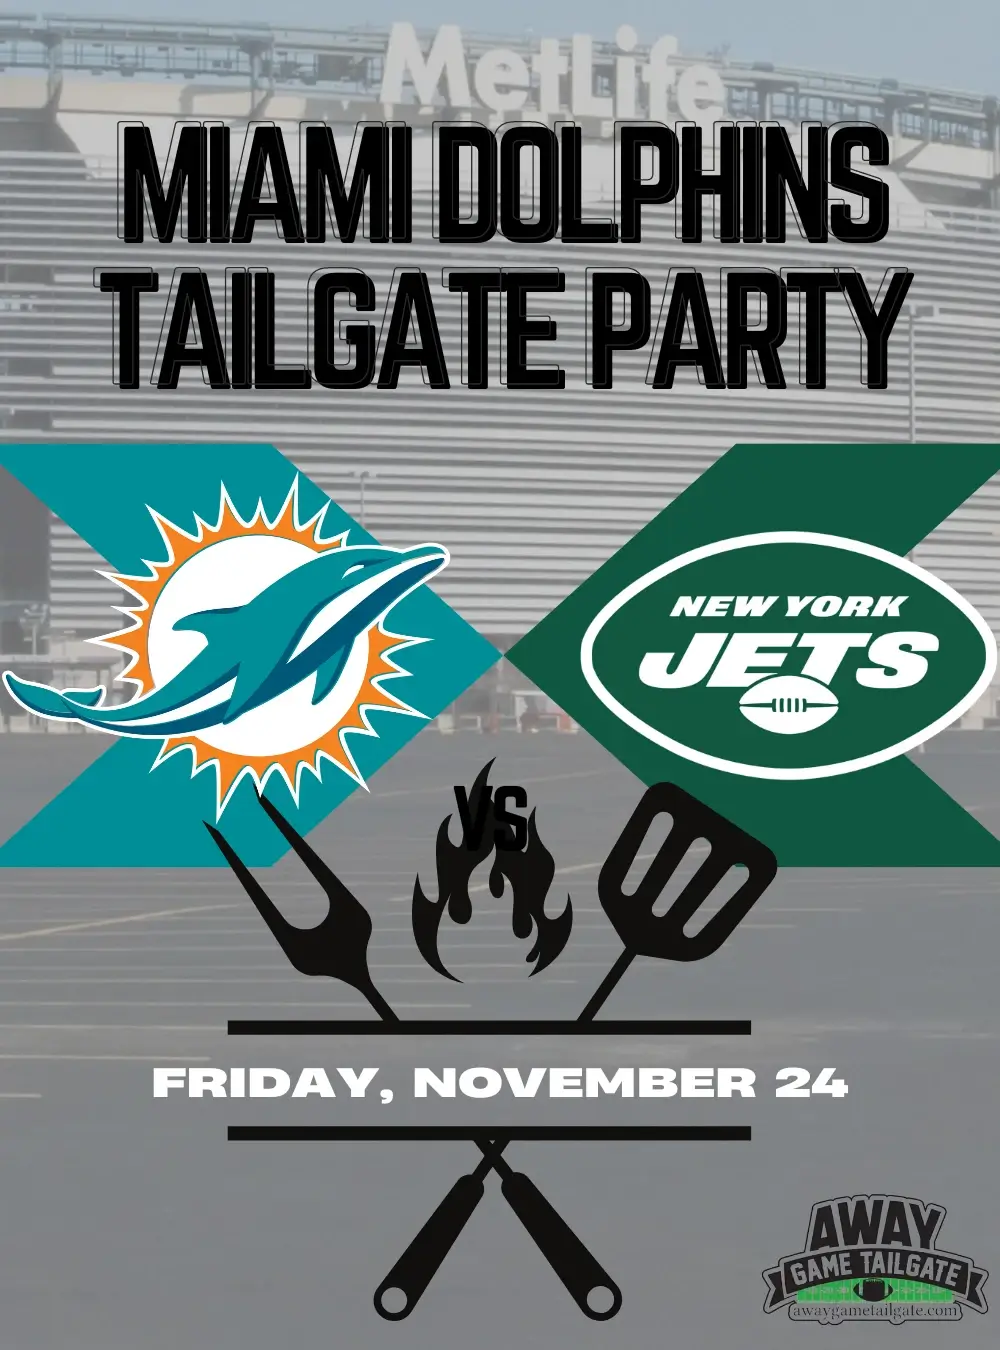 tickets to the dolphins game